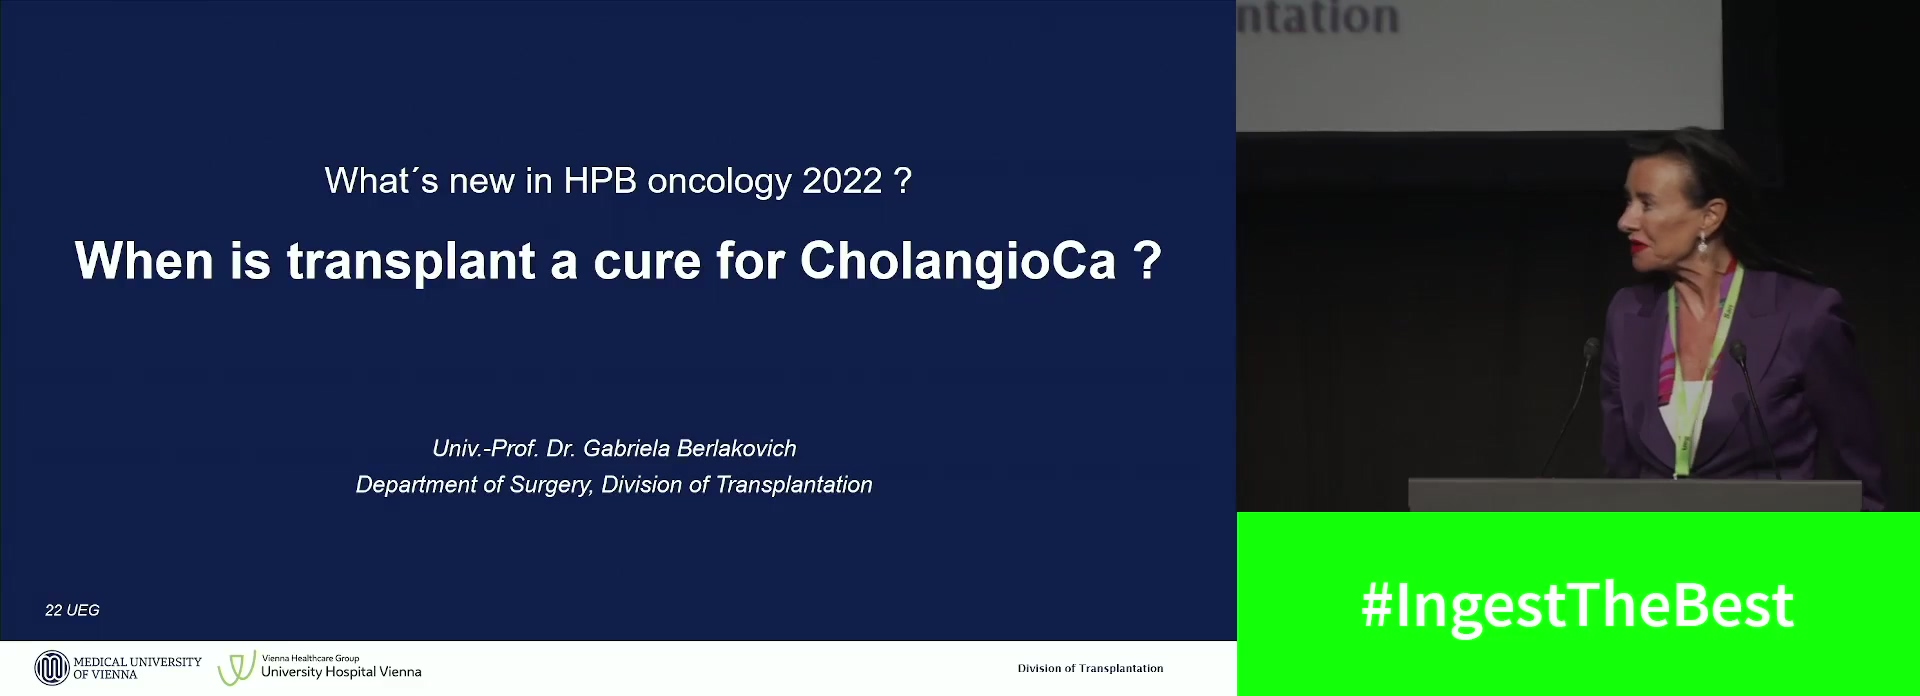 When is transplant a cure for CholangioCa?